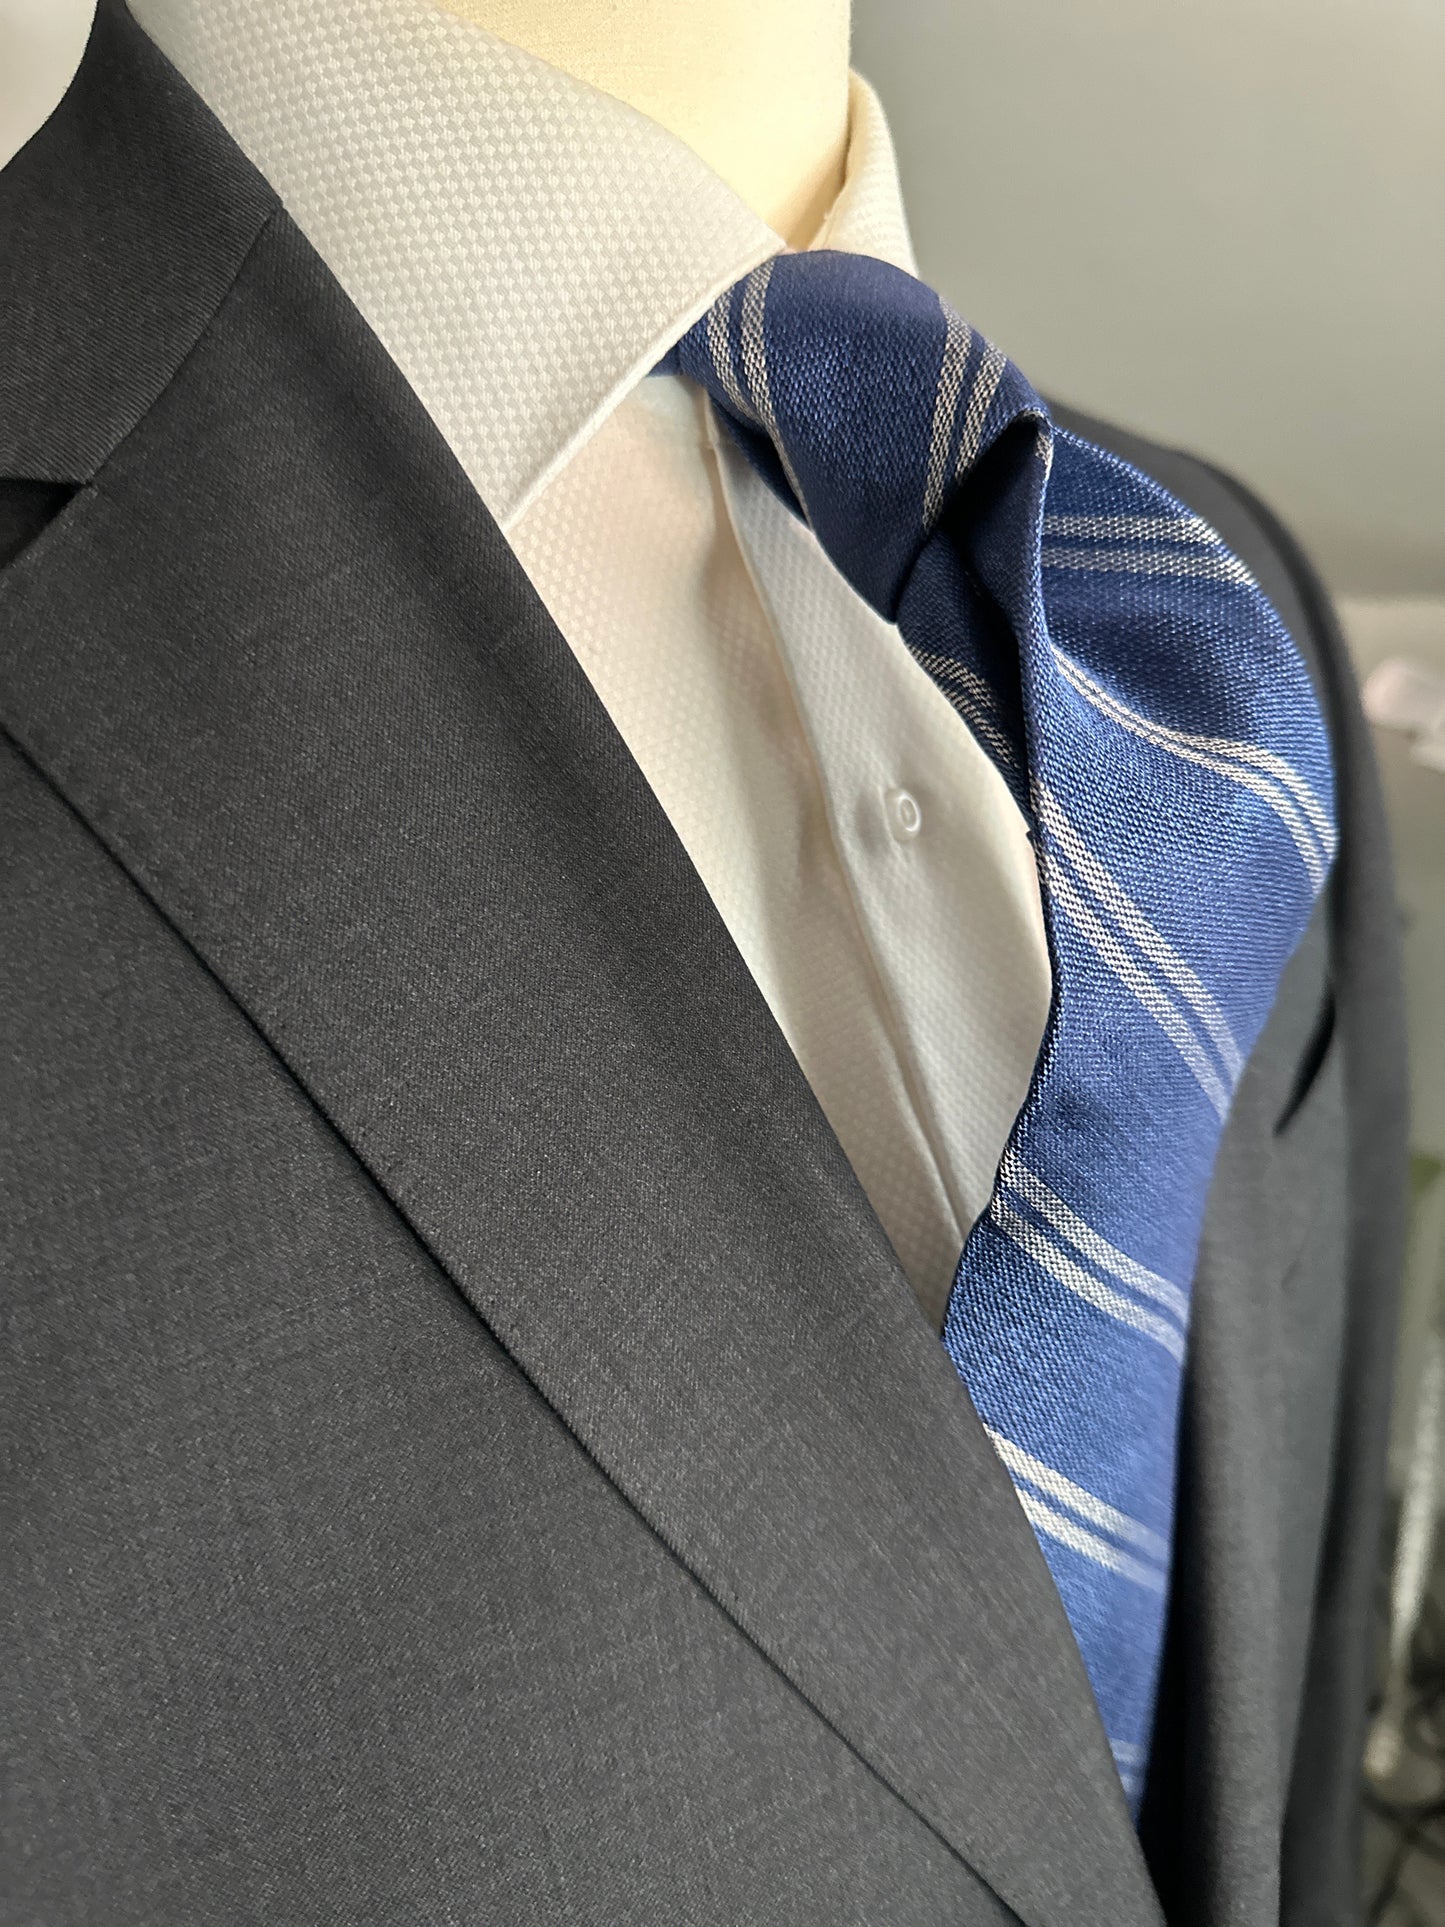 The textured woven silk of this blue denim tie is perfect for all seasons. The texture goes well with wool flannels, plaids and interesting mini checks. Made from 100% silk, the denim blue necktie combines well with pure white for that contrast or a pale grey to bring out the double charcoal stripe in the tie.